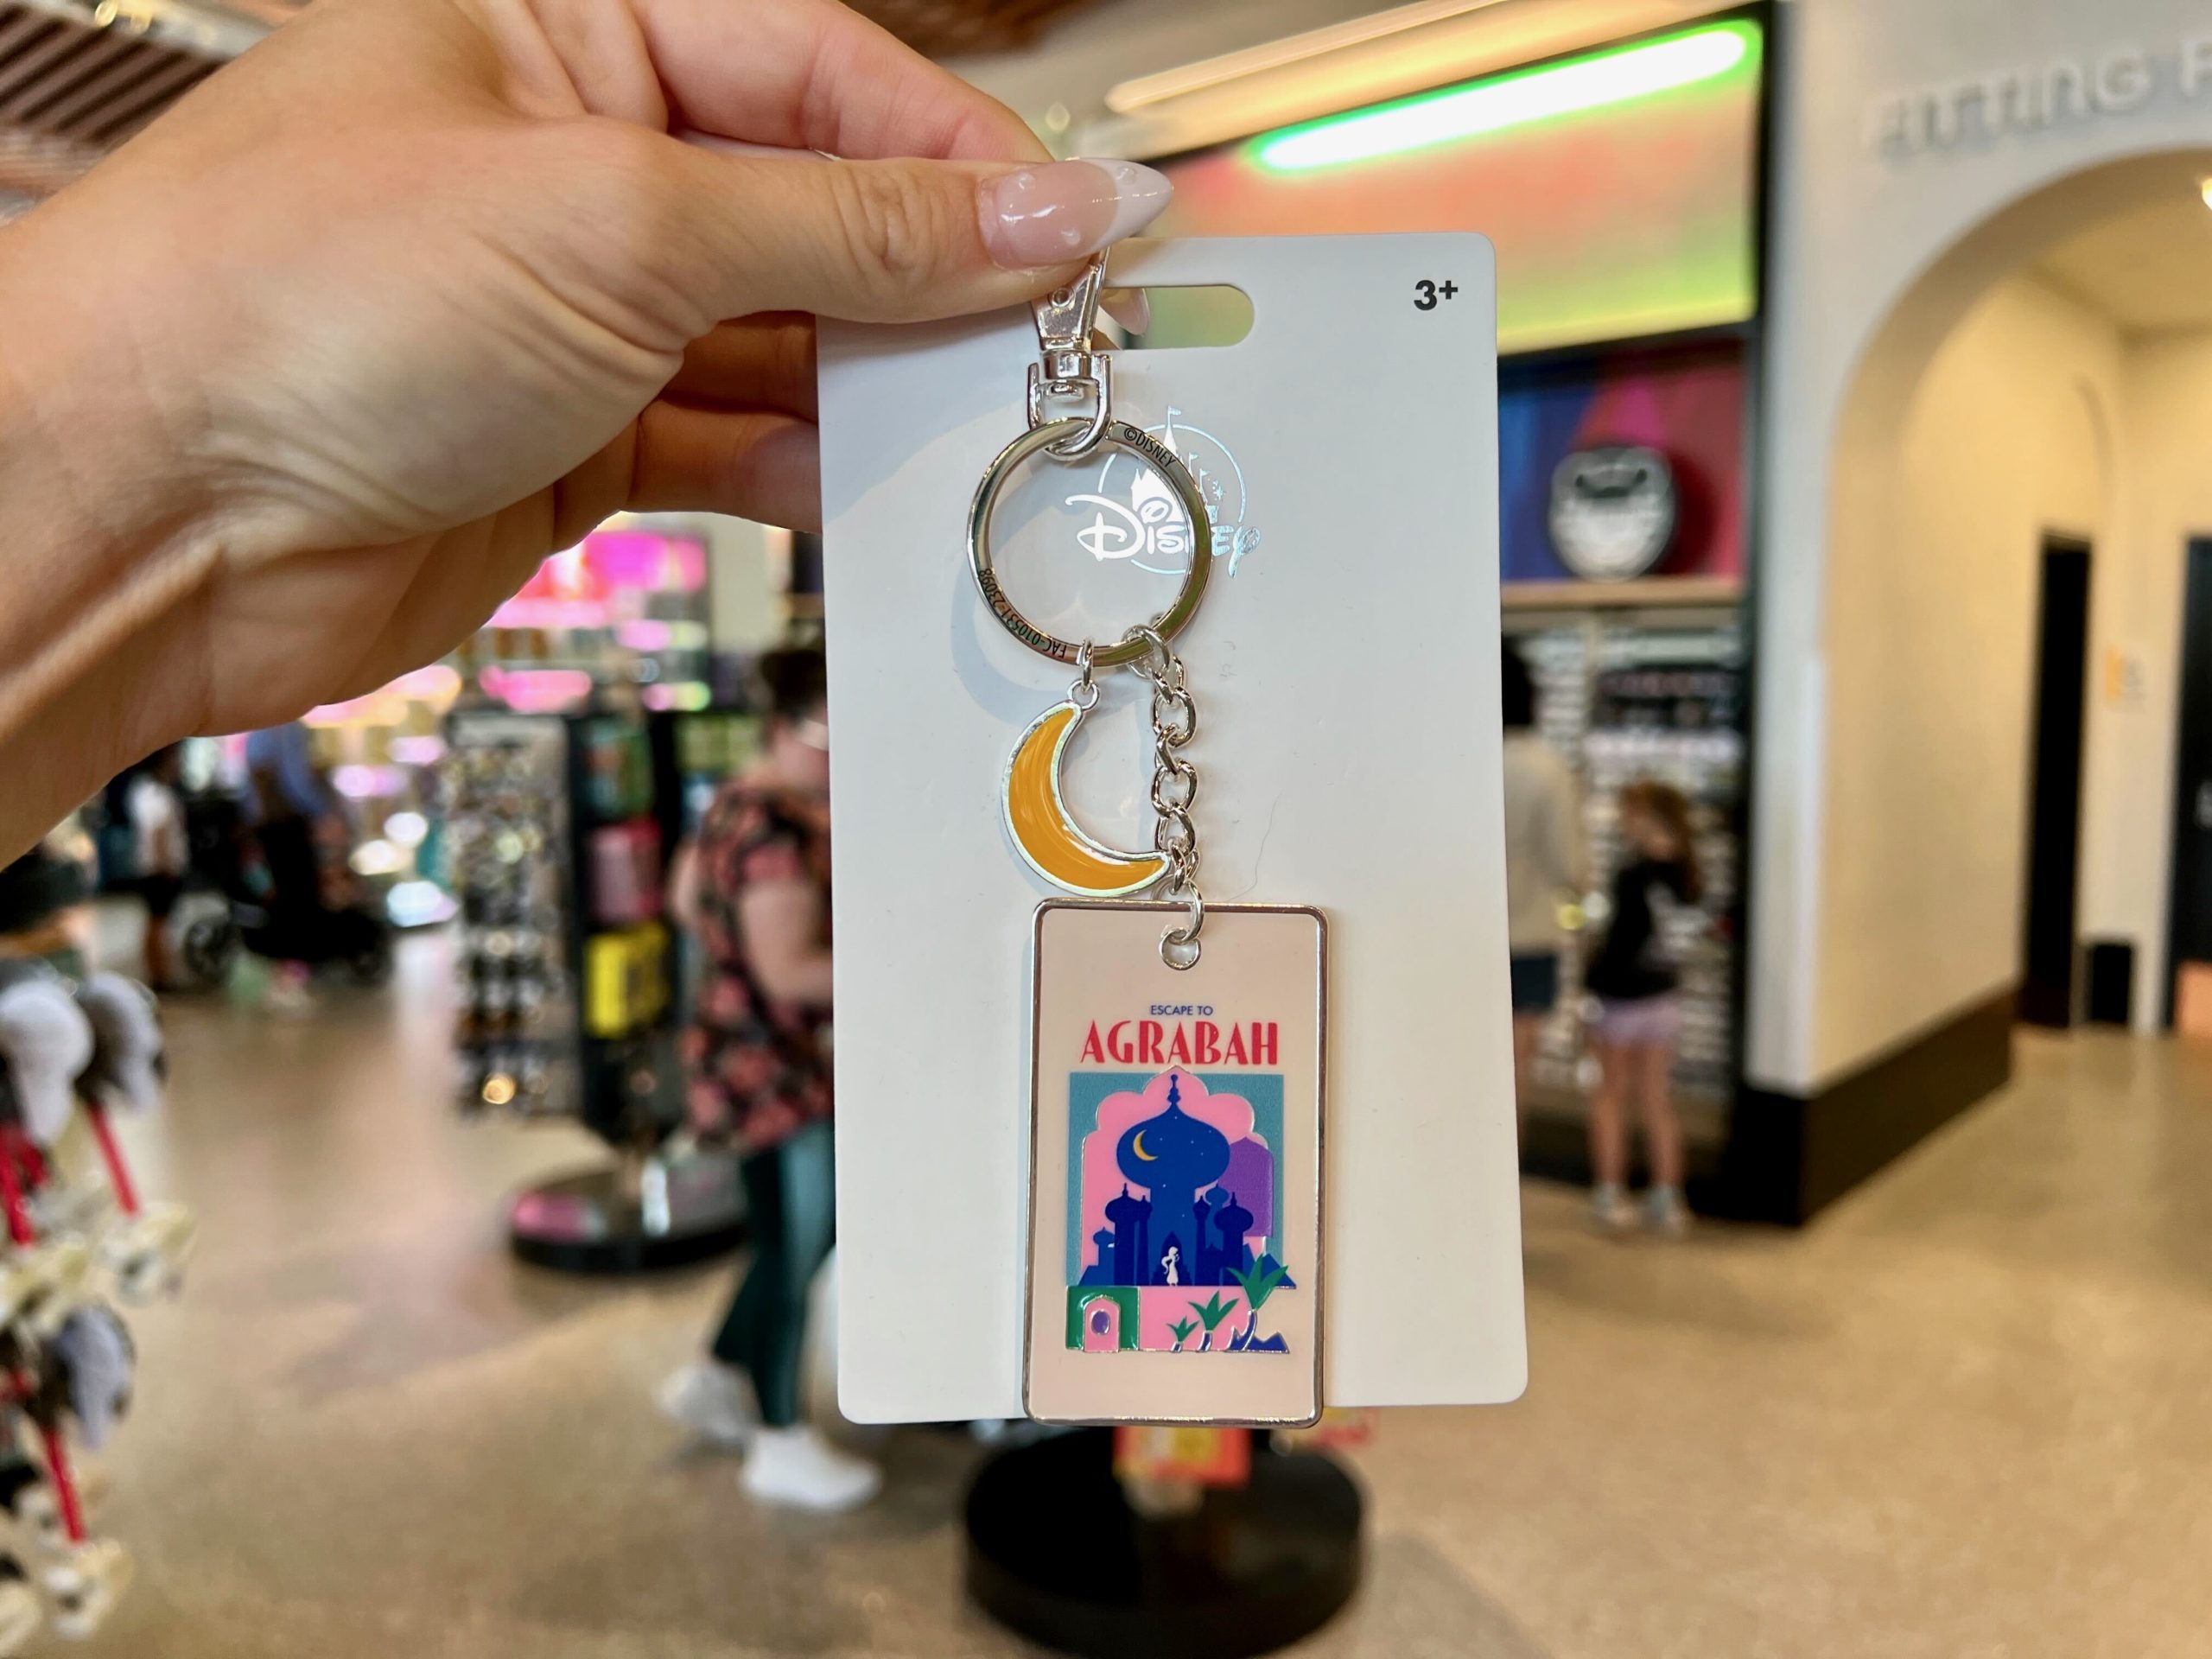 Princess City Keychains at Creations Shop in Disney Springs